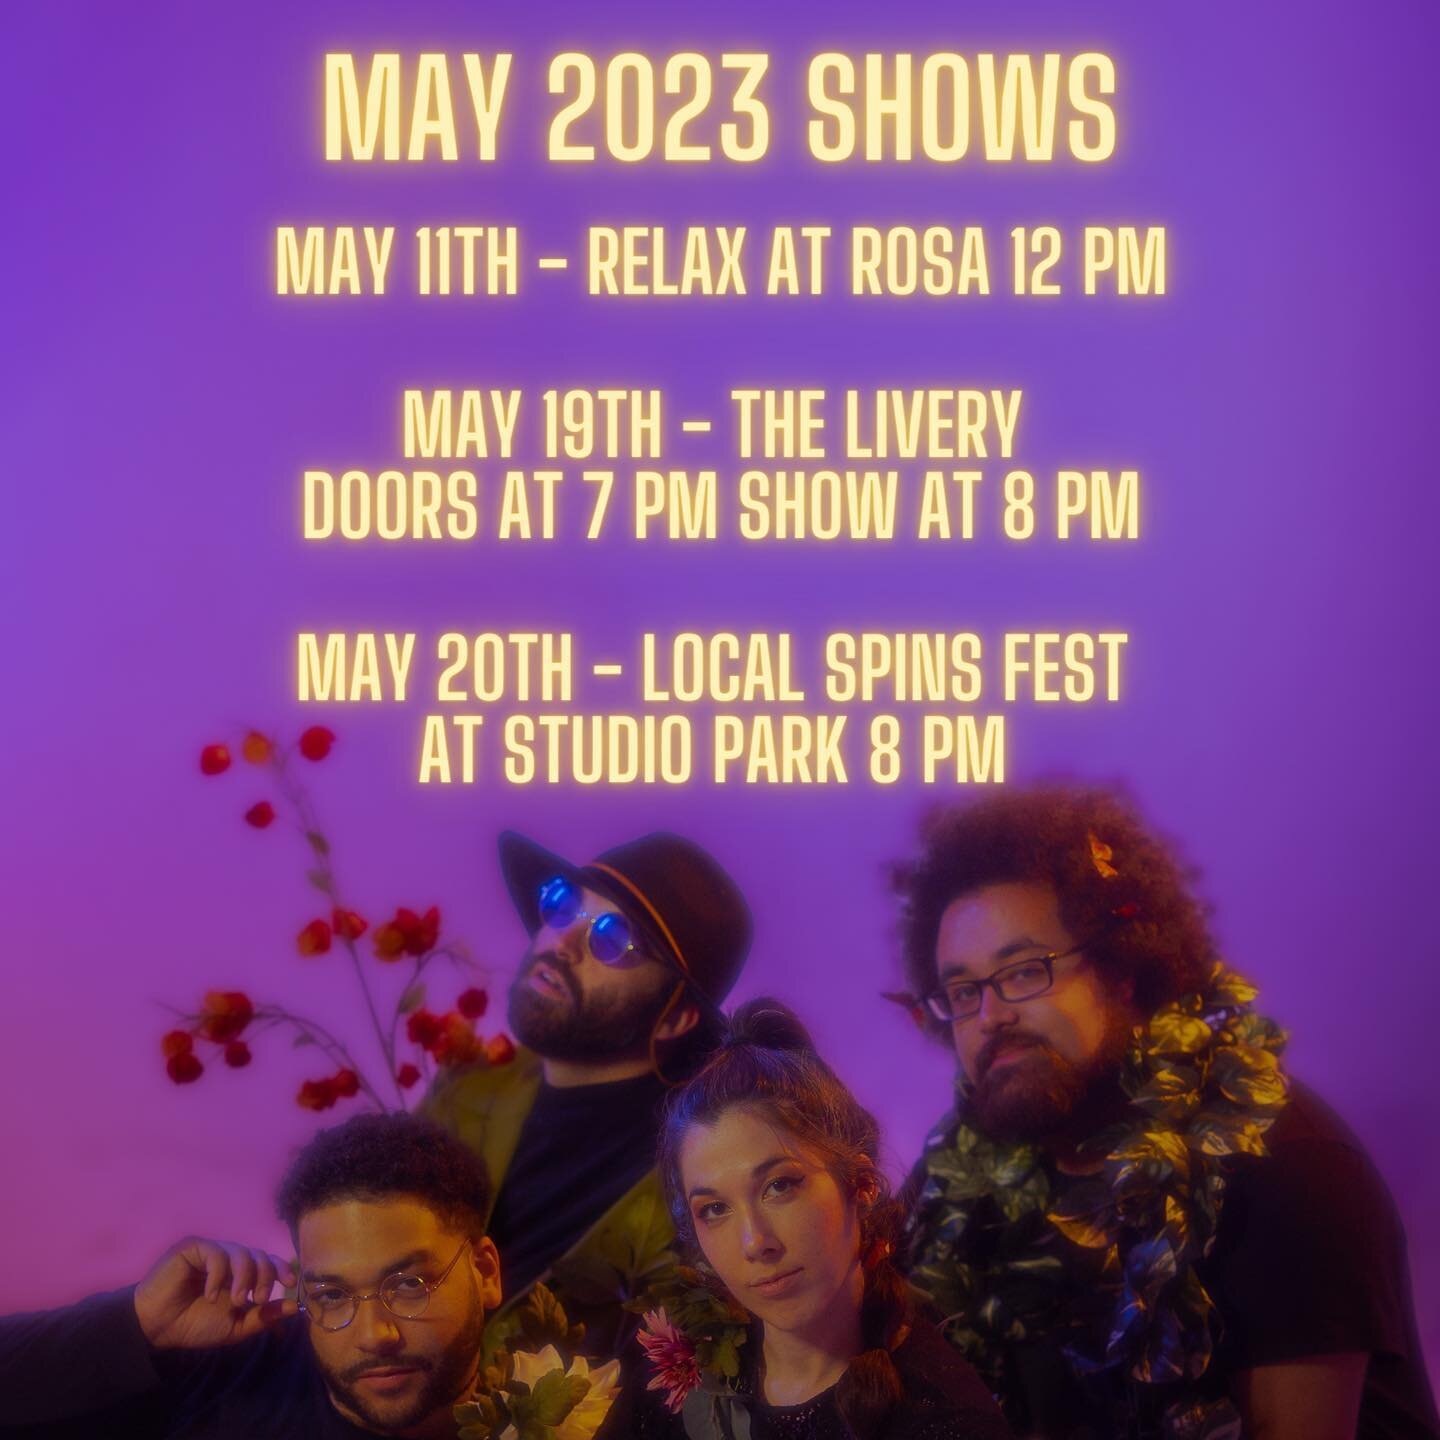 We&rsquo;re basking among the May flowers for a few more spring shows!

Grand Rapids, you get a double dose of us this month and we&rsquo;re happy to be returning to Benton Harbor! Here&rsquo;s where you can find us:

TOMORROW! (May 11th) - Relax at 